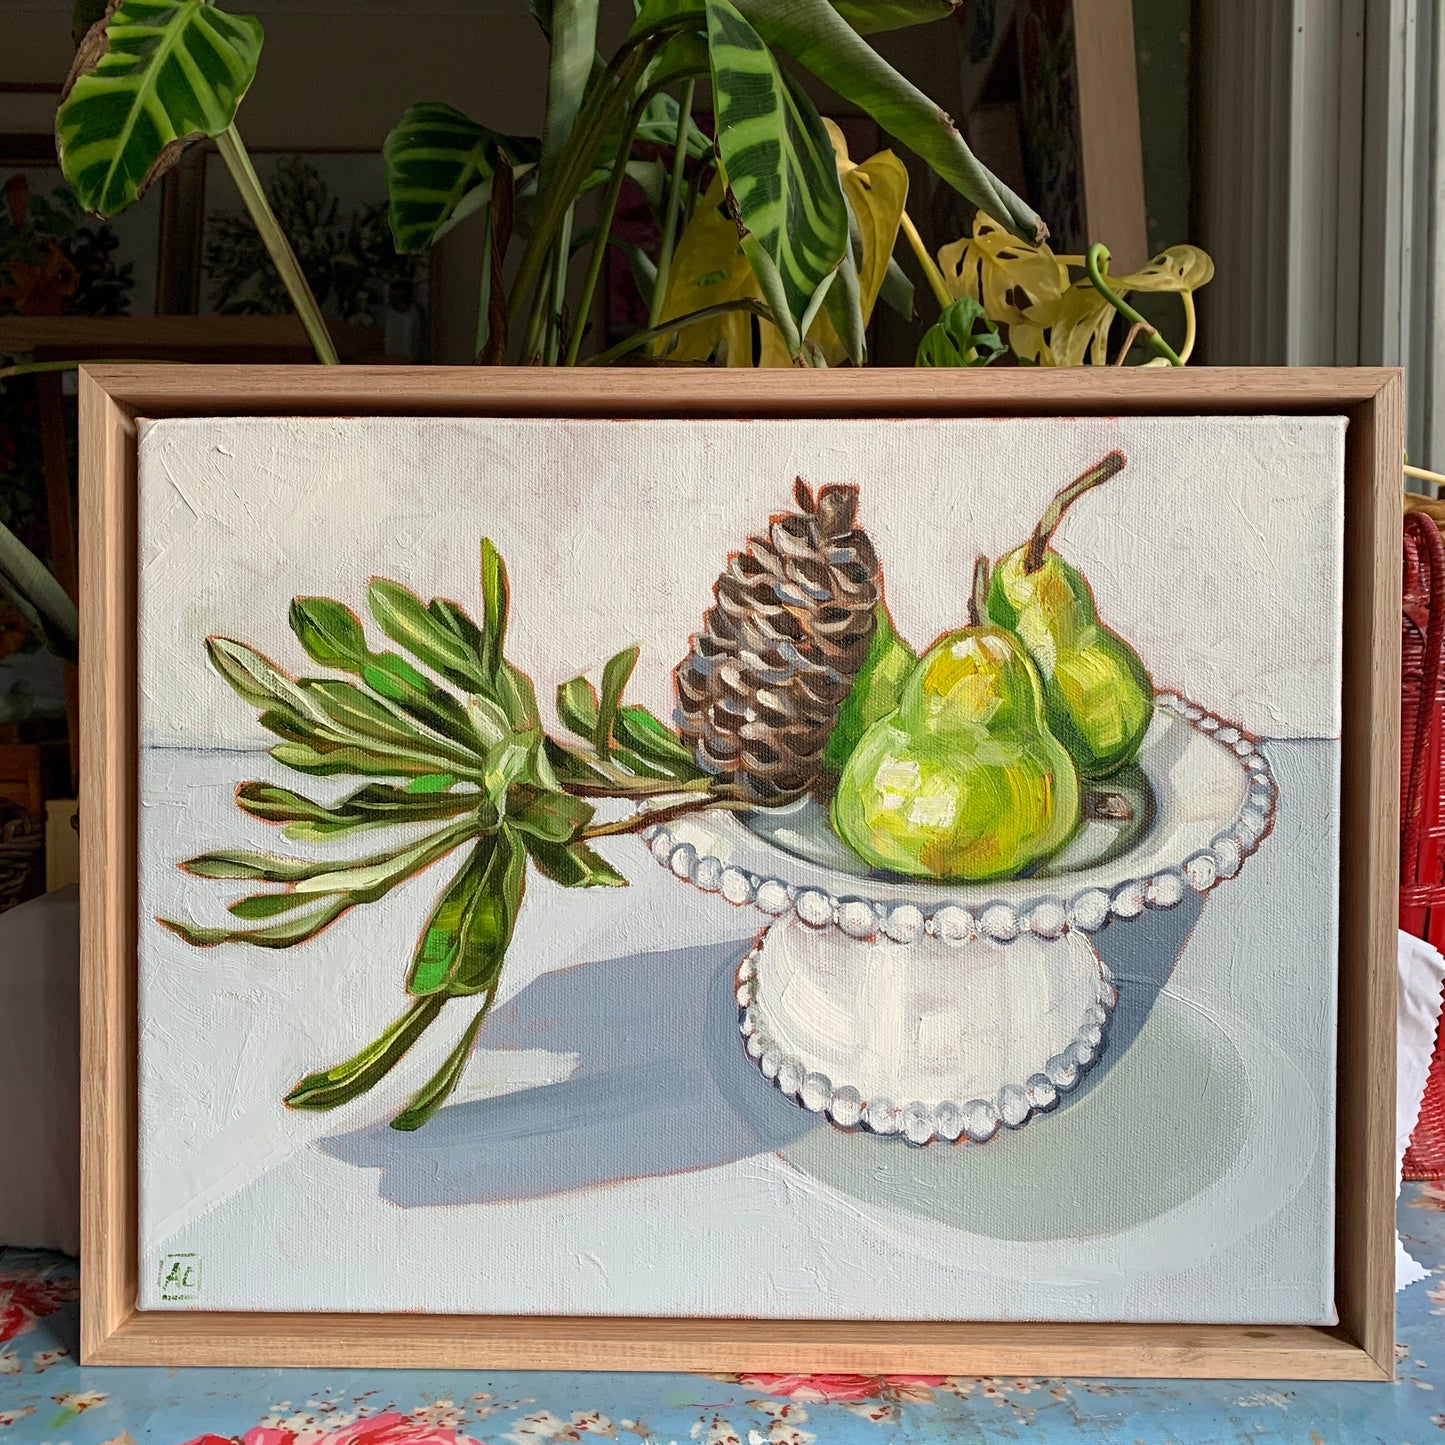 Pears and Banksia study